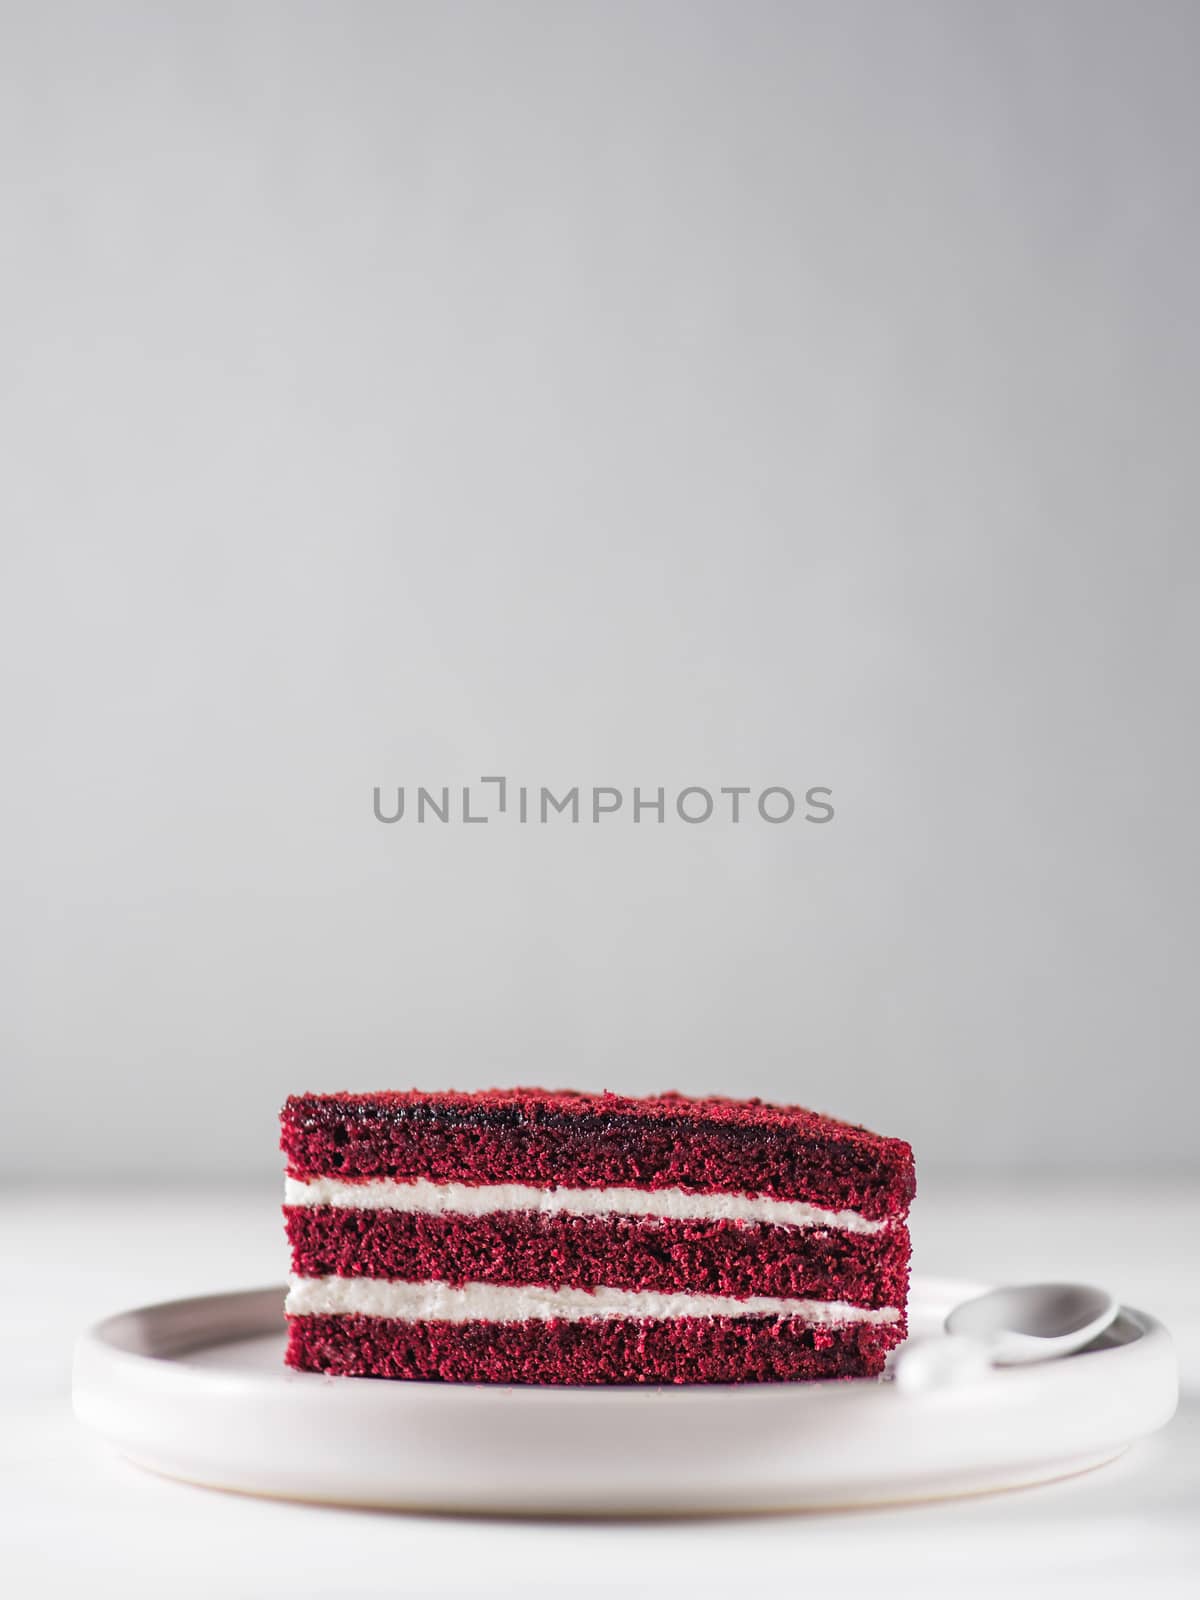 Piece of red velvet cake with perfect texture by fascinadora